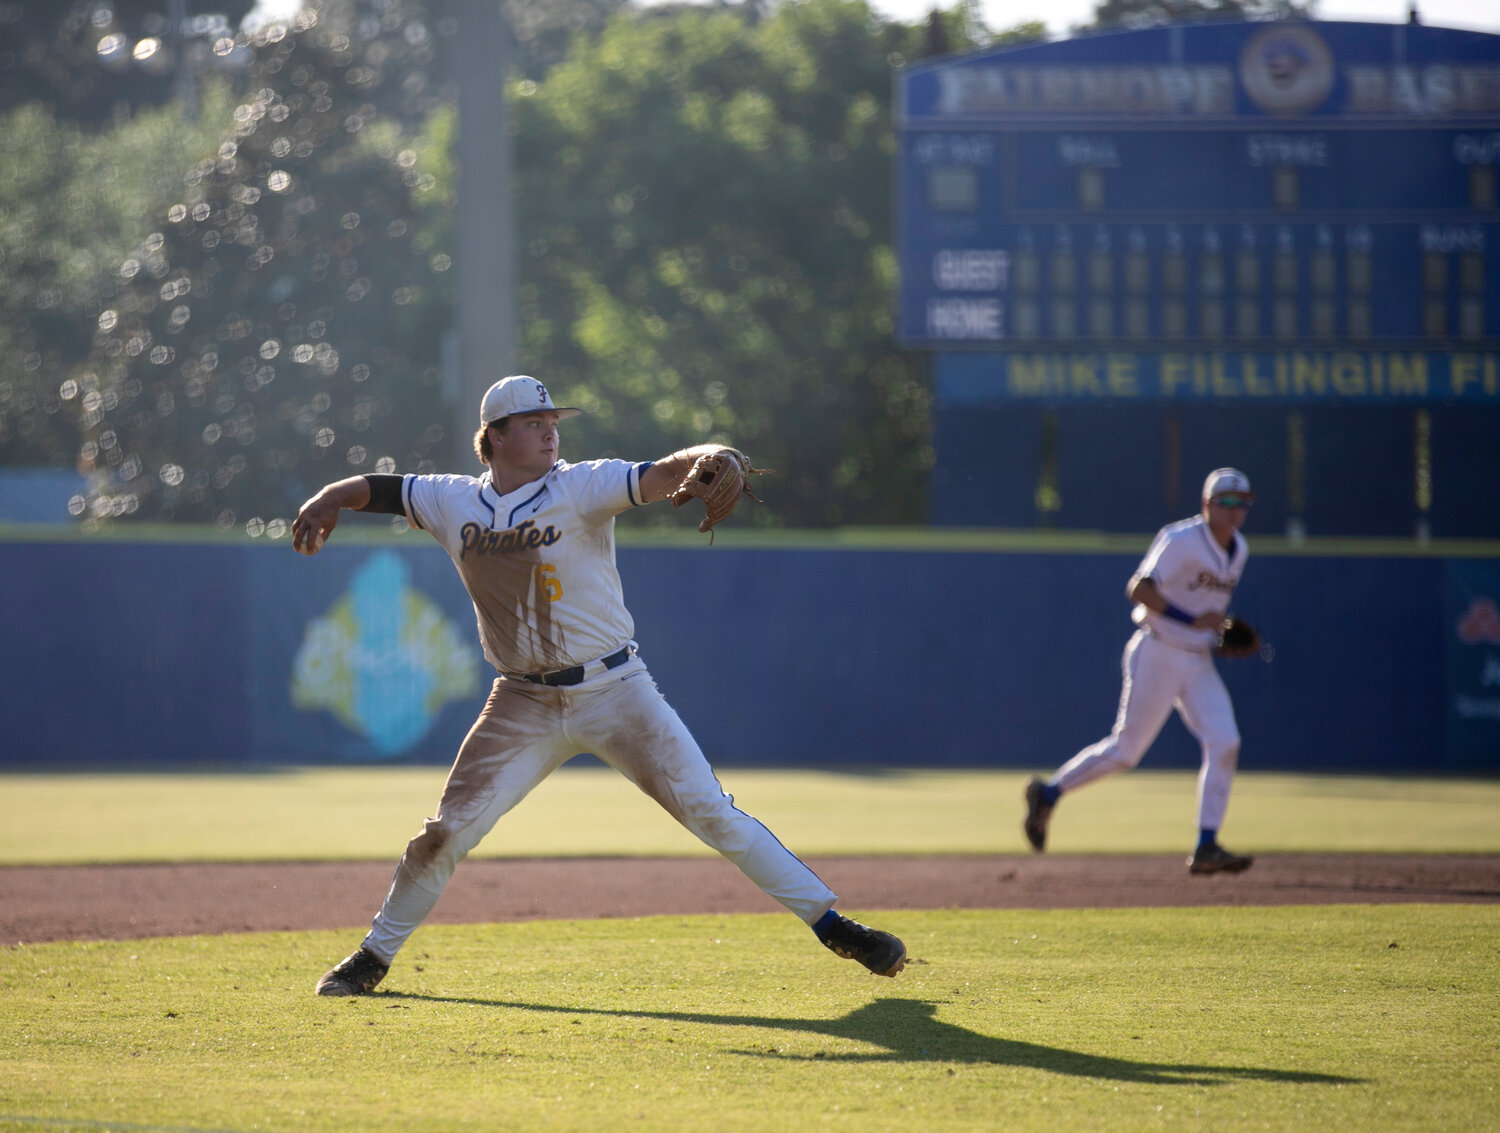 Fairhope senior Jackson Hatcher readies a throw across the diamond for an out Friday, April 28, on Mike Fillingim Field at Volanta Park during the first-round playoff series against the Smiths Station Panthers.